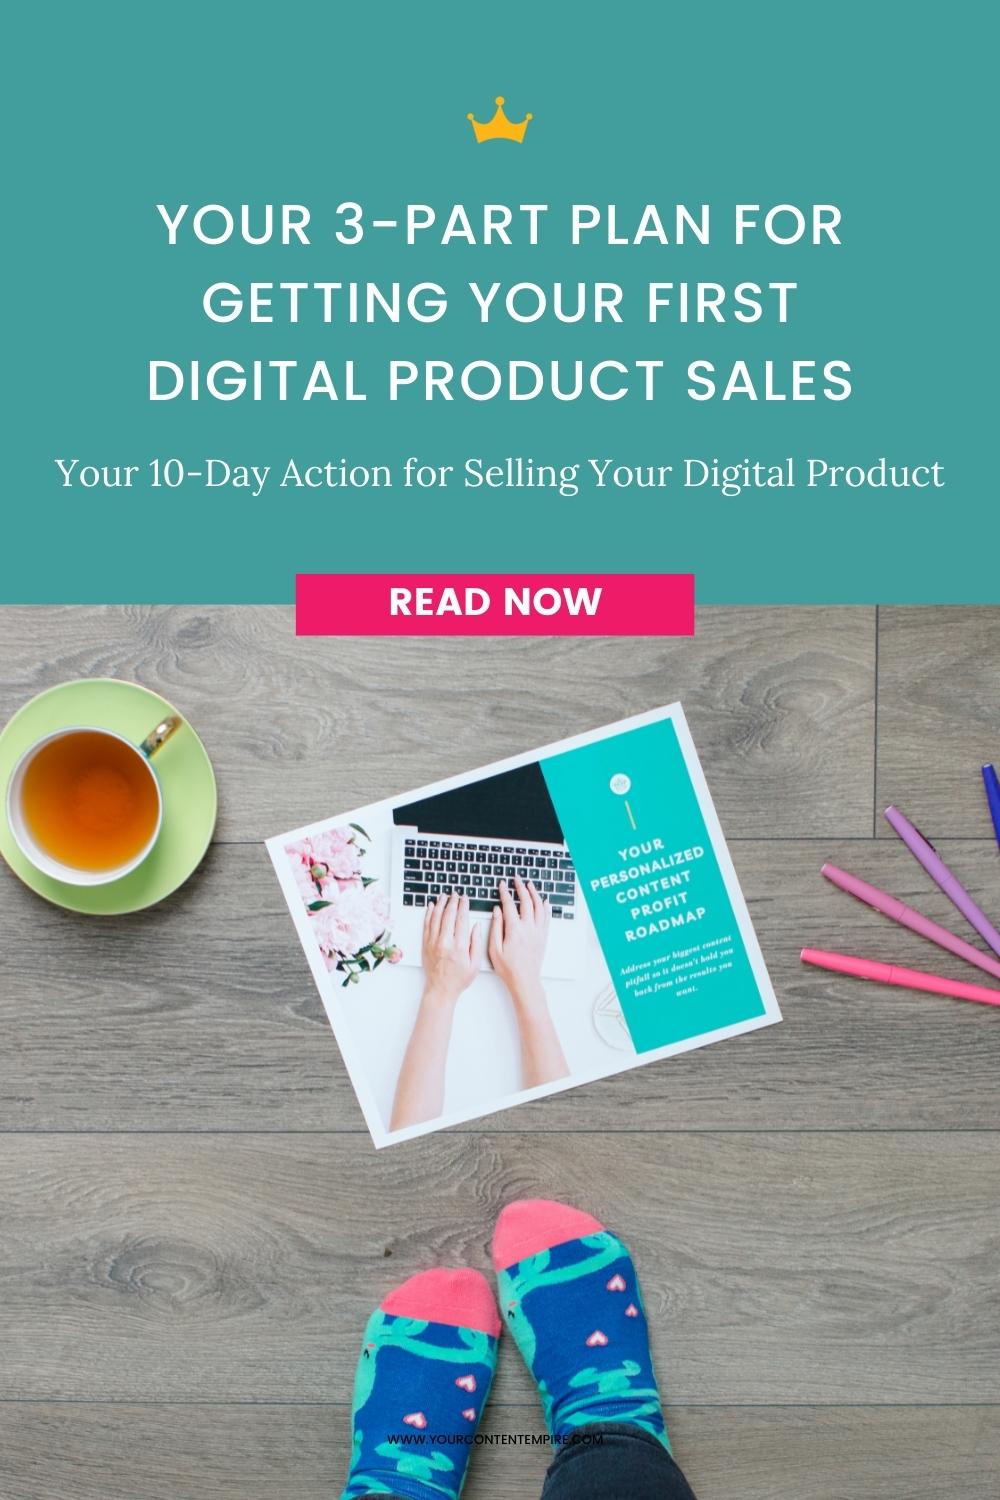 Your 3-Part Plan for Getting Your First Digital Product Sales